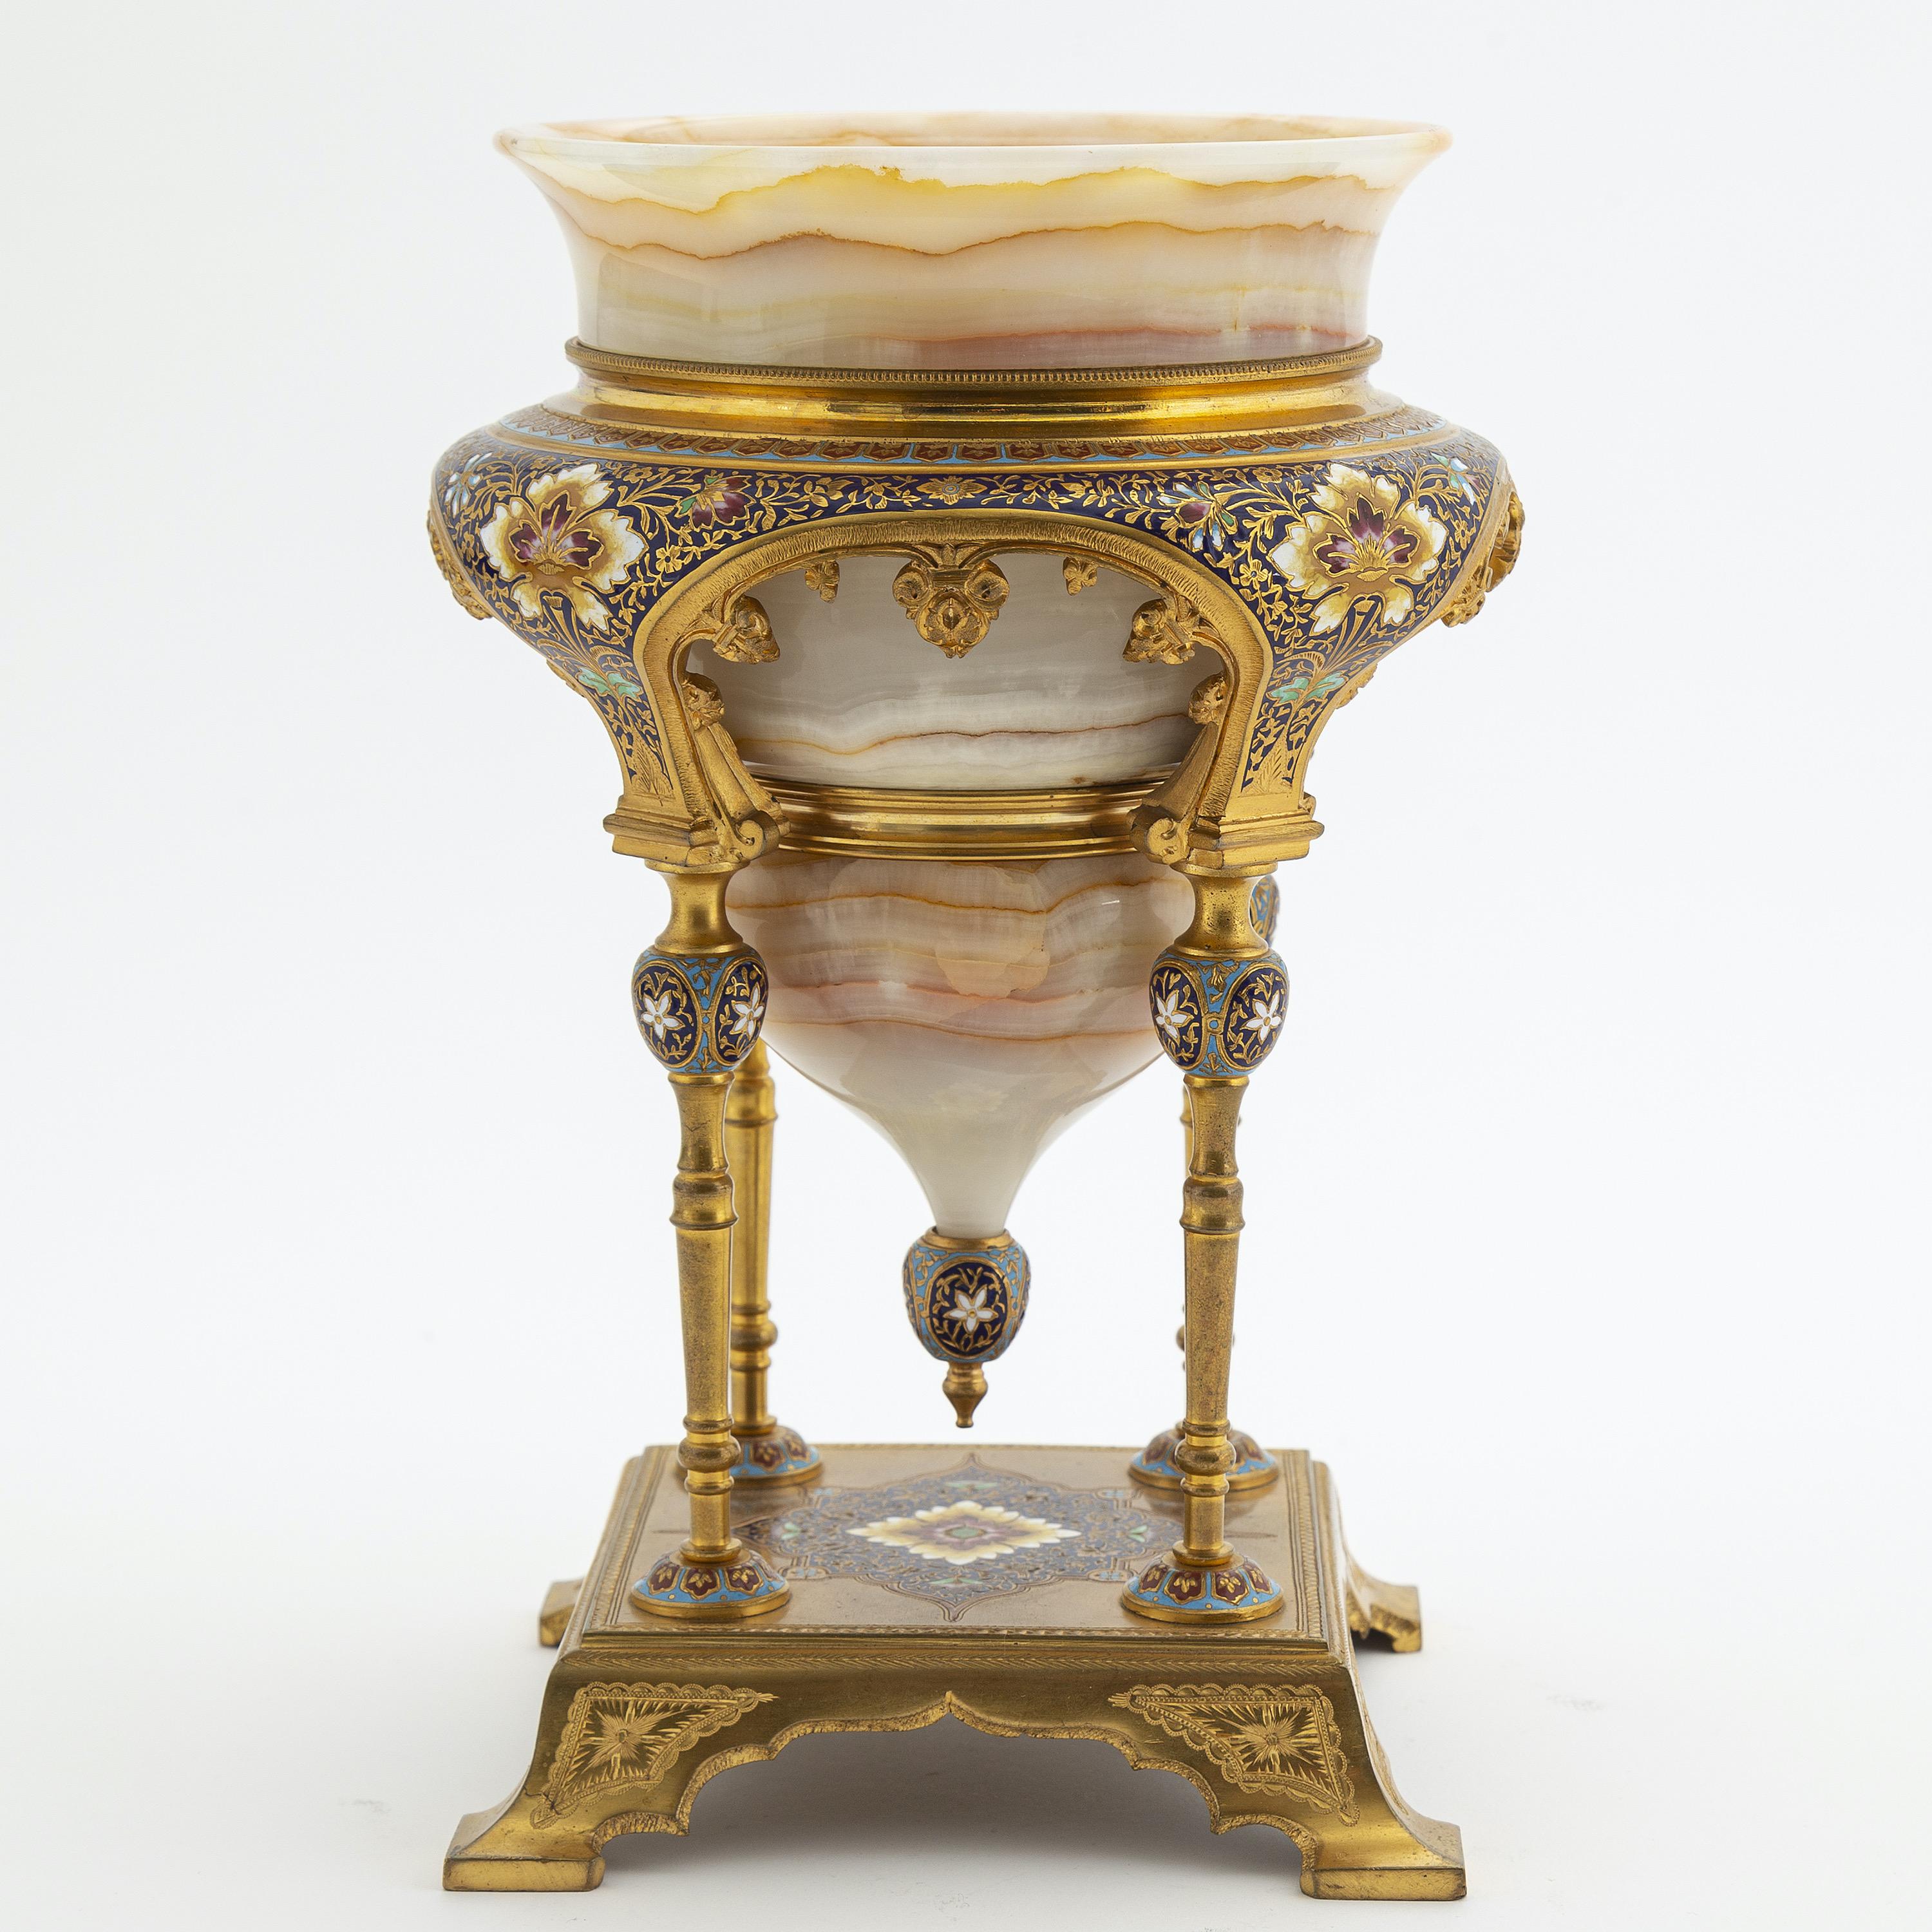 A fine 19th century onyx, champlevé and gilt bronze bowl/vase in the Oriental Moorish Islamic taste, attributed to Louchet Frères, The urn shaped onyx inserted in an architectural gilt bronze mounting on four columns supporting a large moulding